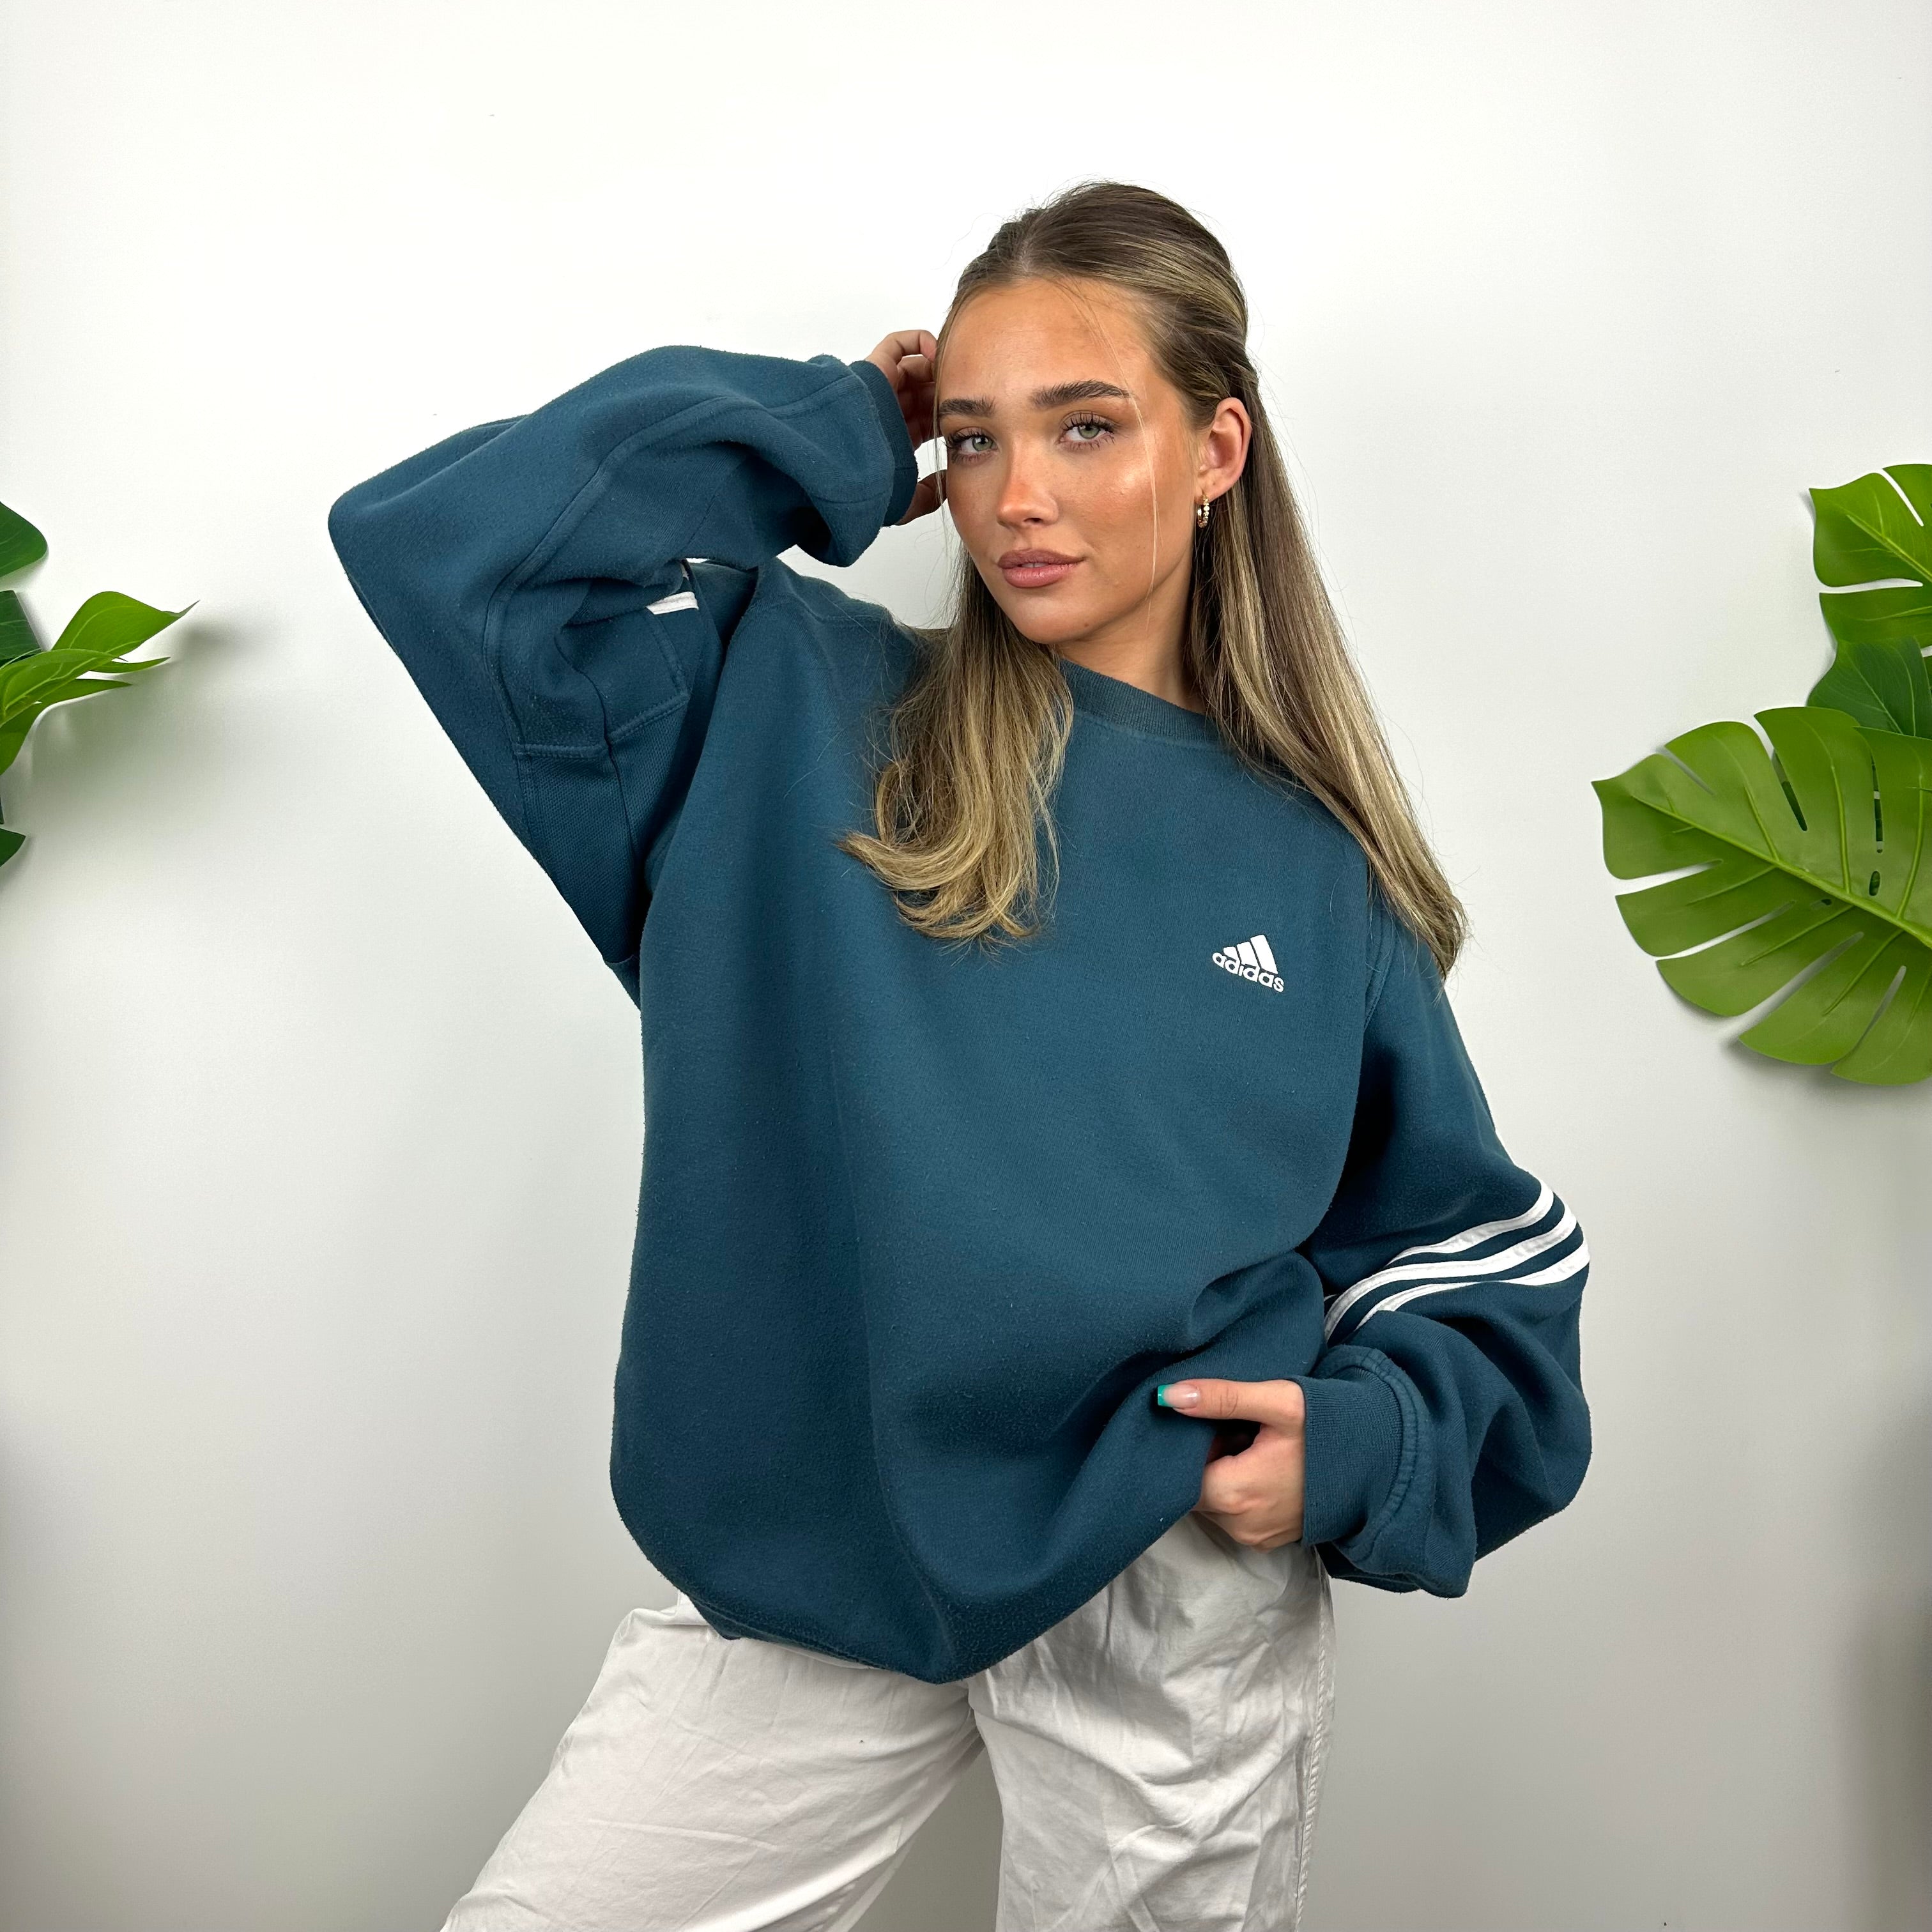 Adidas Blue Embroidered Spell Out Sweatshirt (L)